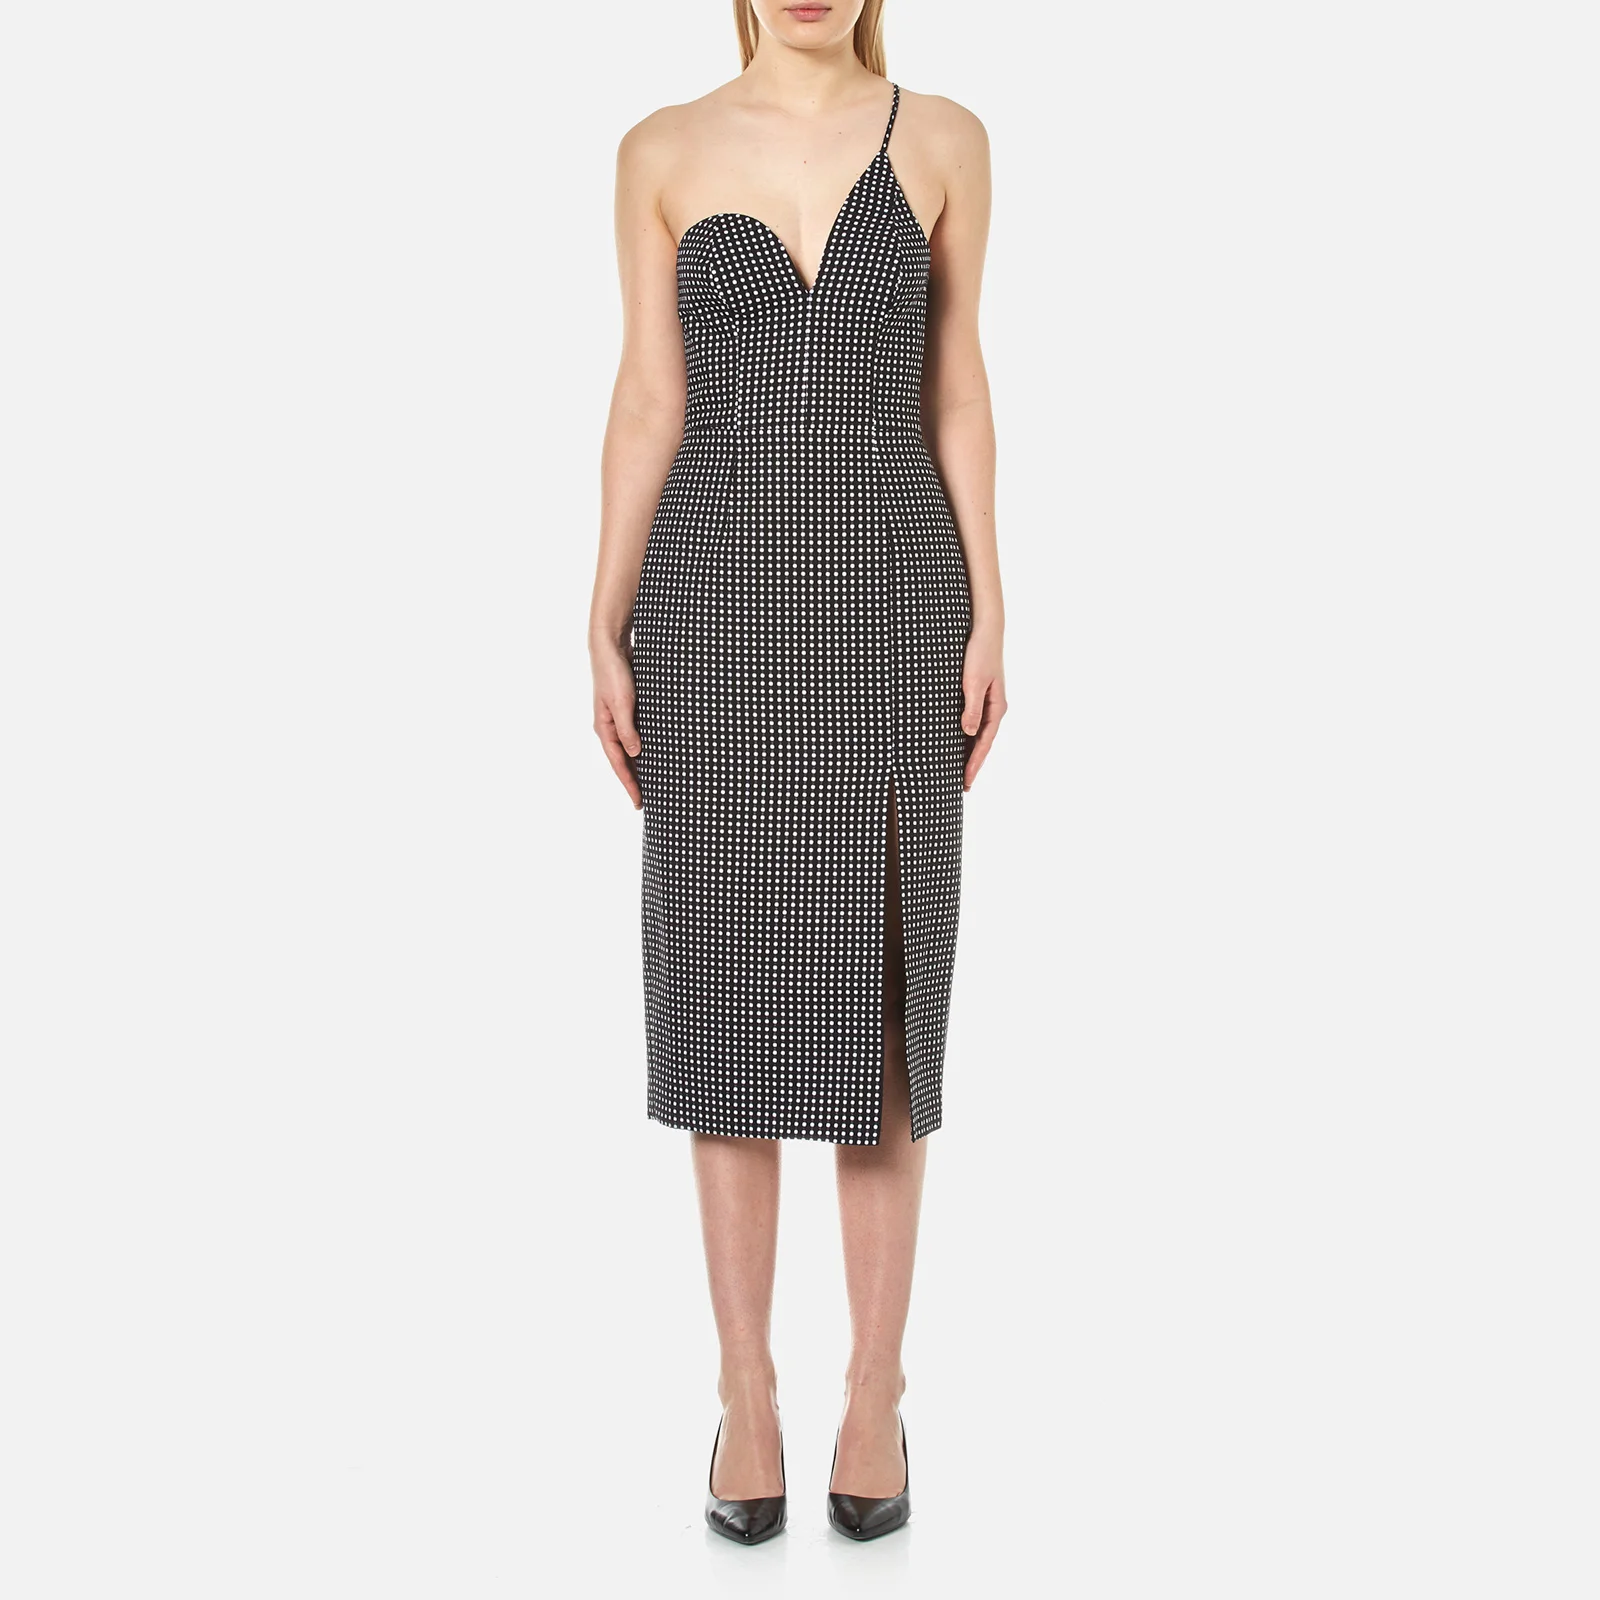 C/MEO COLLECTIVE Women's No Competition One Strap Dress - Black Dot Image 1